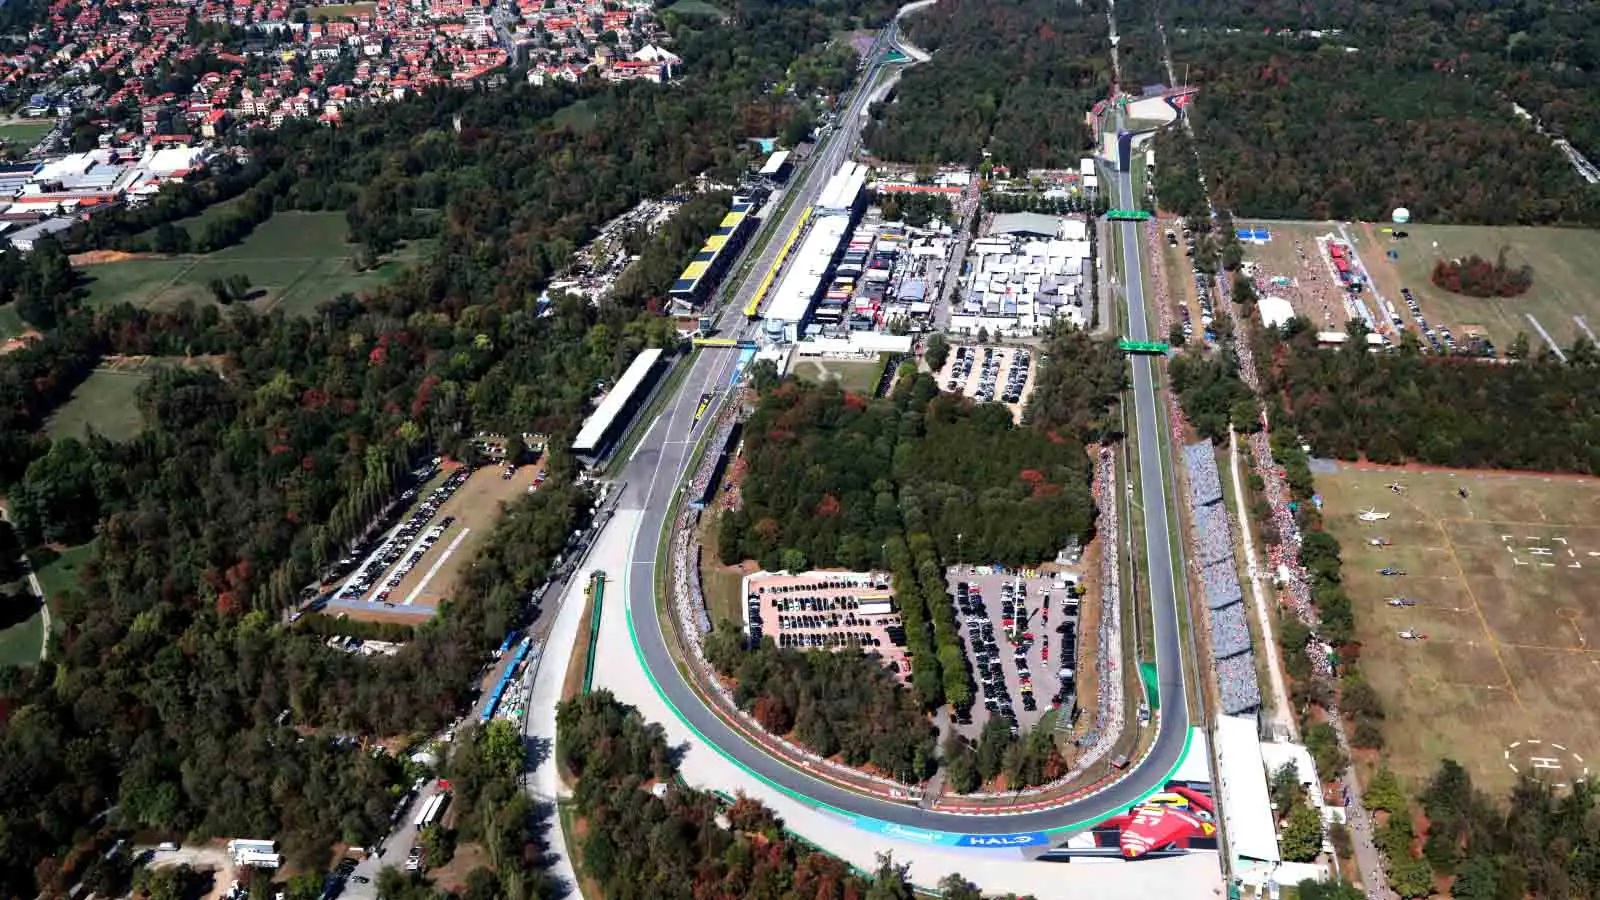 An aerial view of Parabolica during the Italian Grand Prix at Monza.